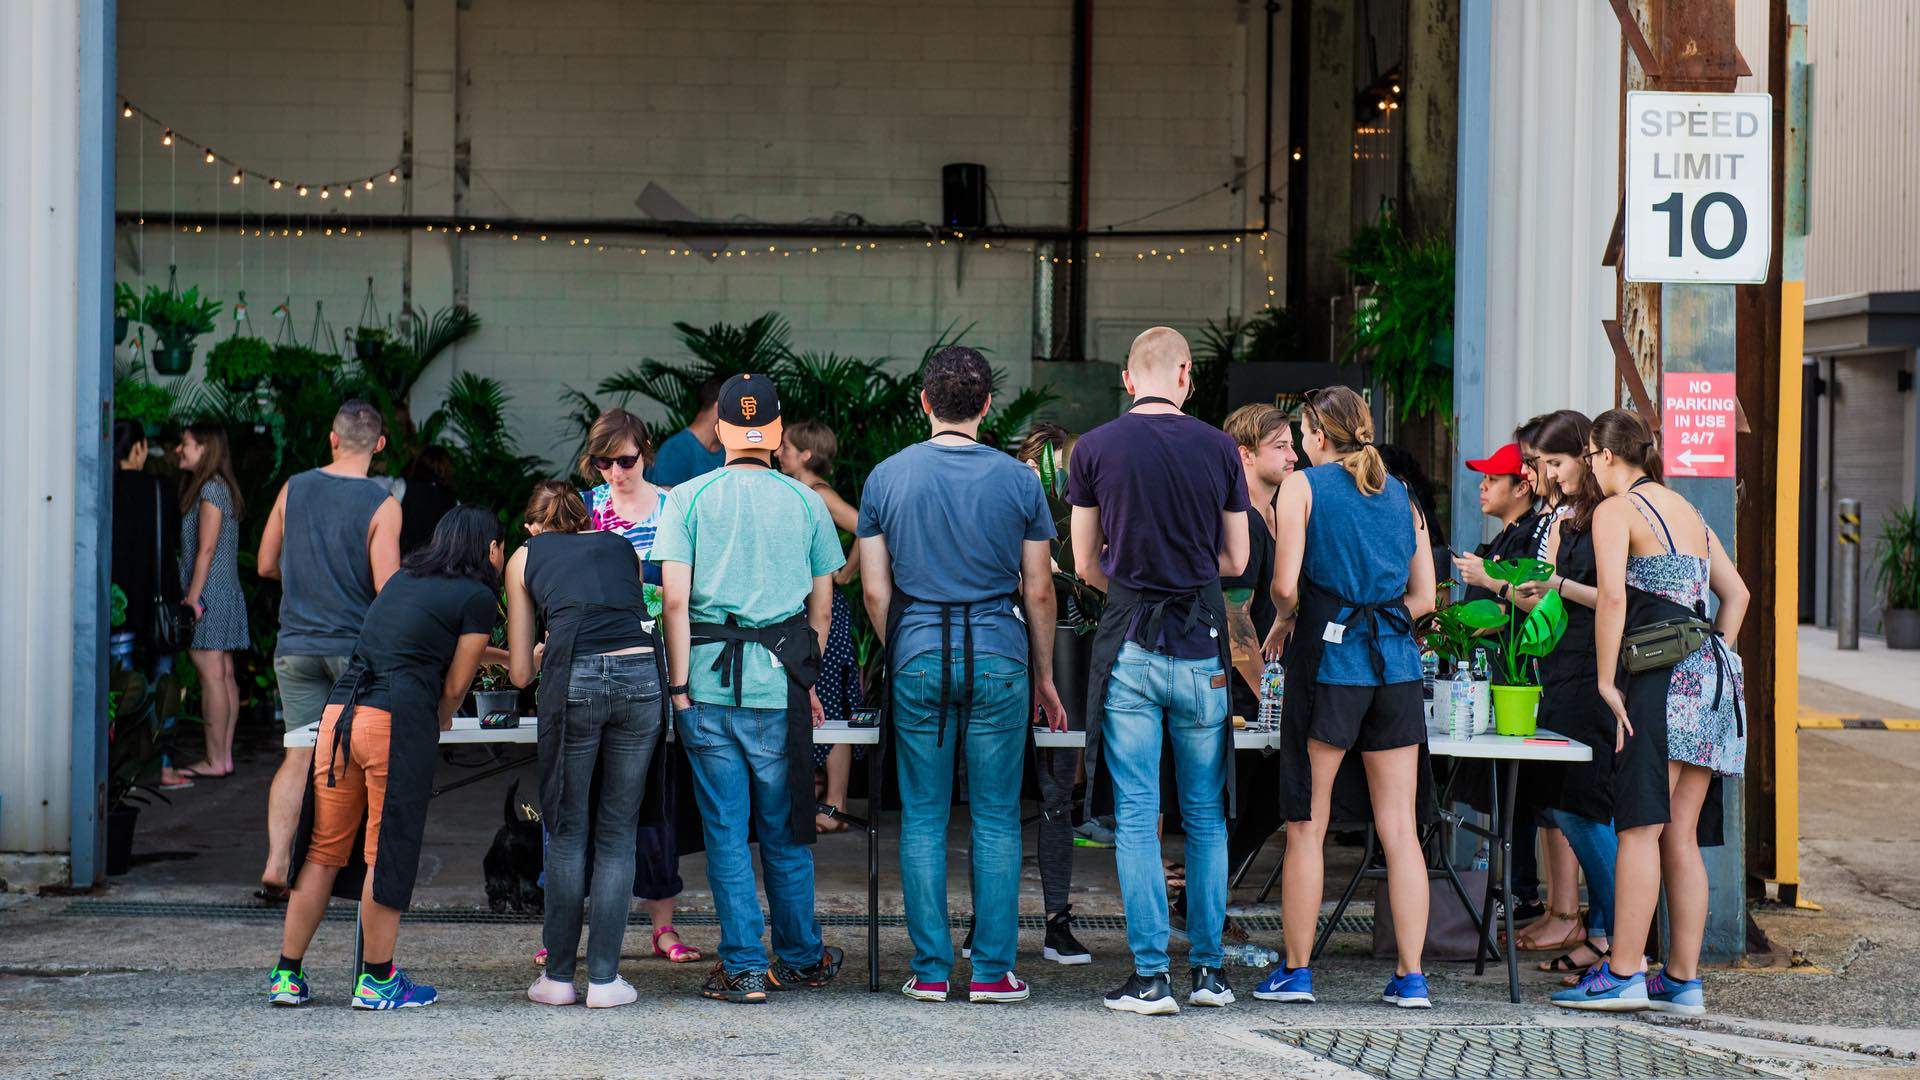 Jungle Party Indoor Plant Warehouse Sale and Giveaway